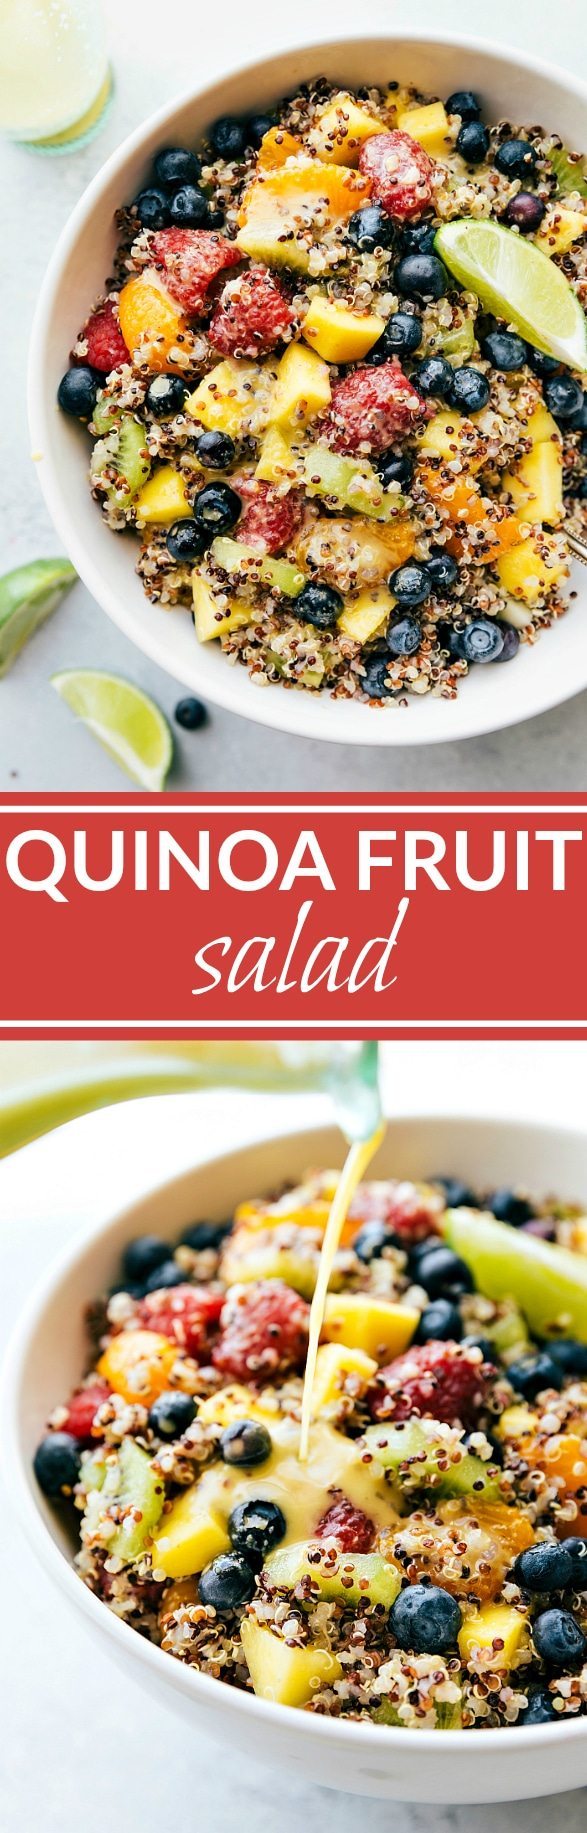 FRUIT QUINOA SALAD! A tri-colored quinoa salad packed with tropical fruits and dressed in a tangy citrus dressing. This salad is vibrant, healthy, and delicious! I Recipe from chelseasmessyapron.com